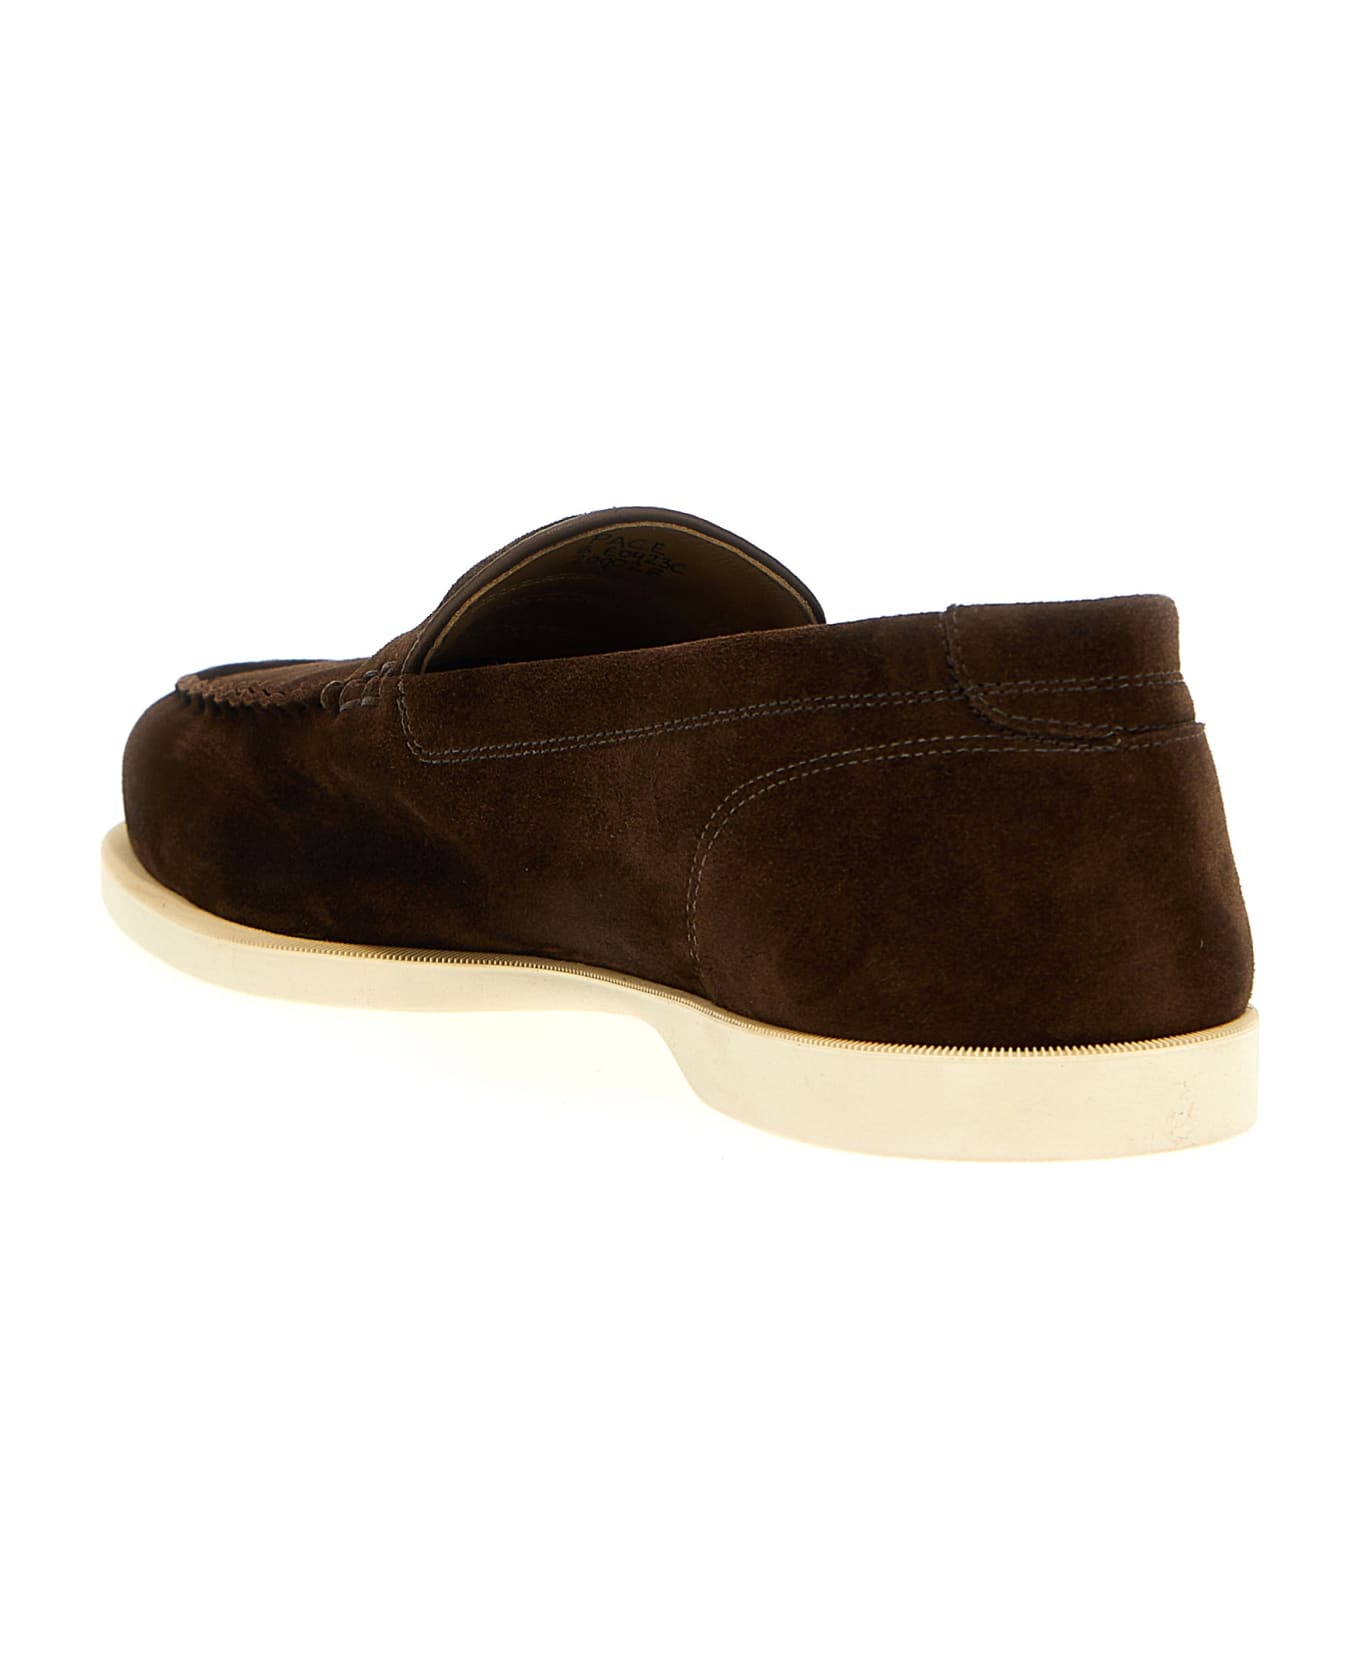 John Lobb 'pace' Loafers - Brown